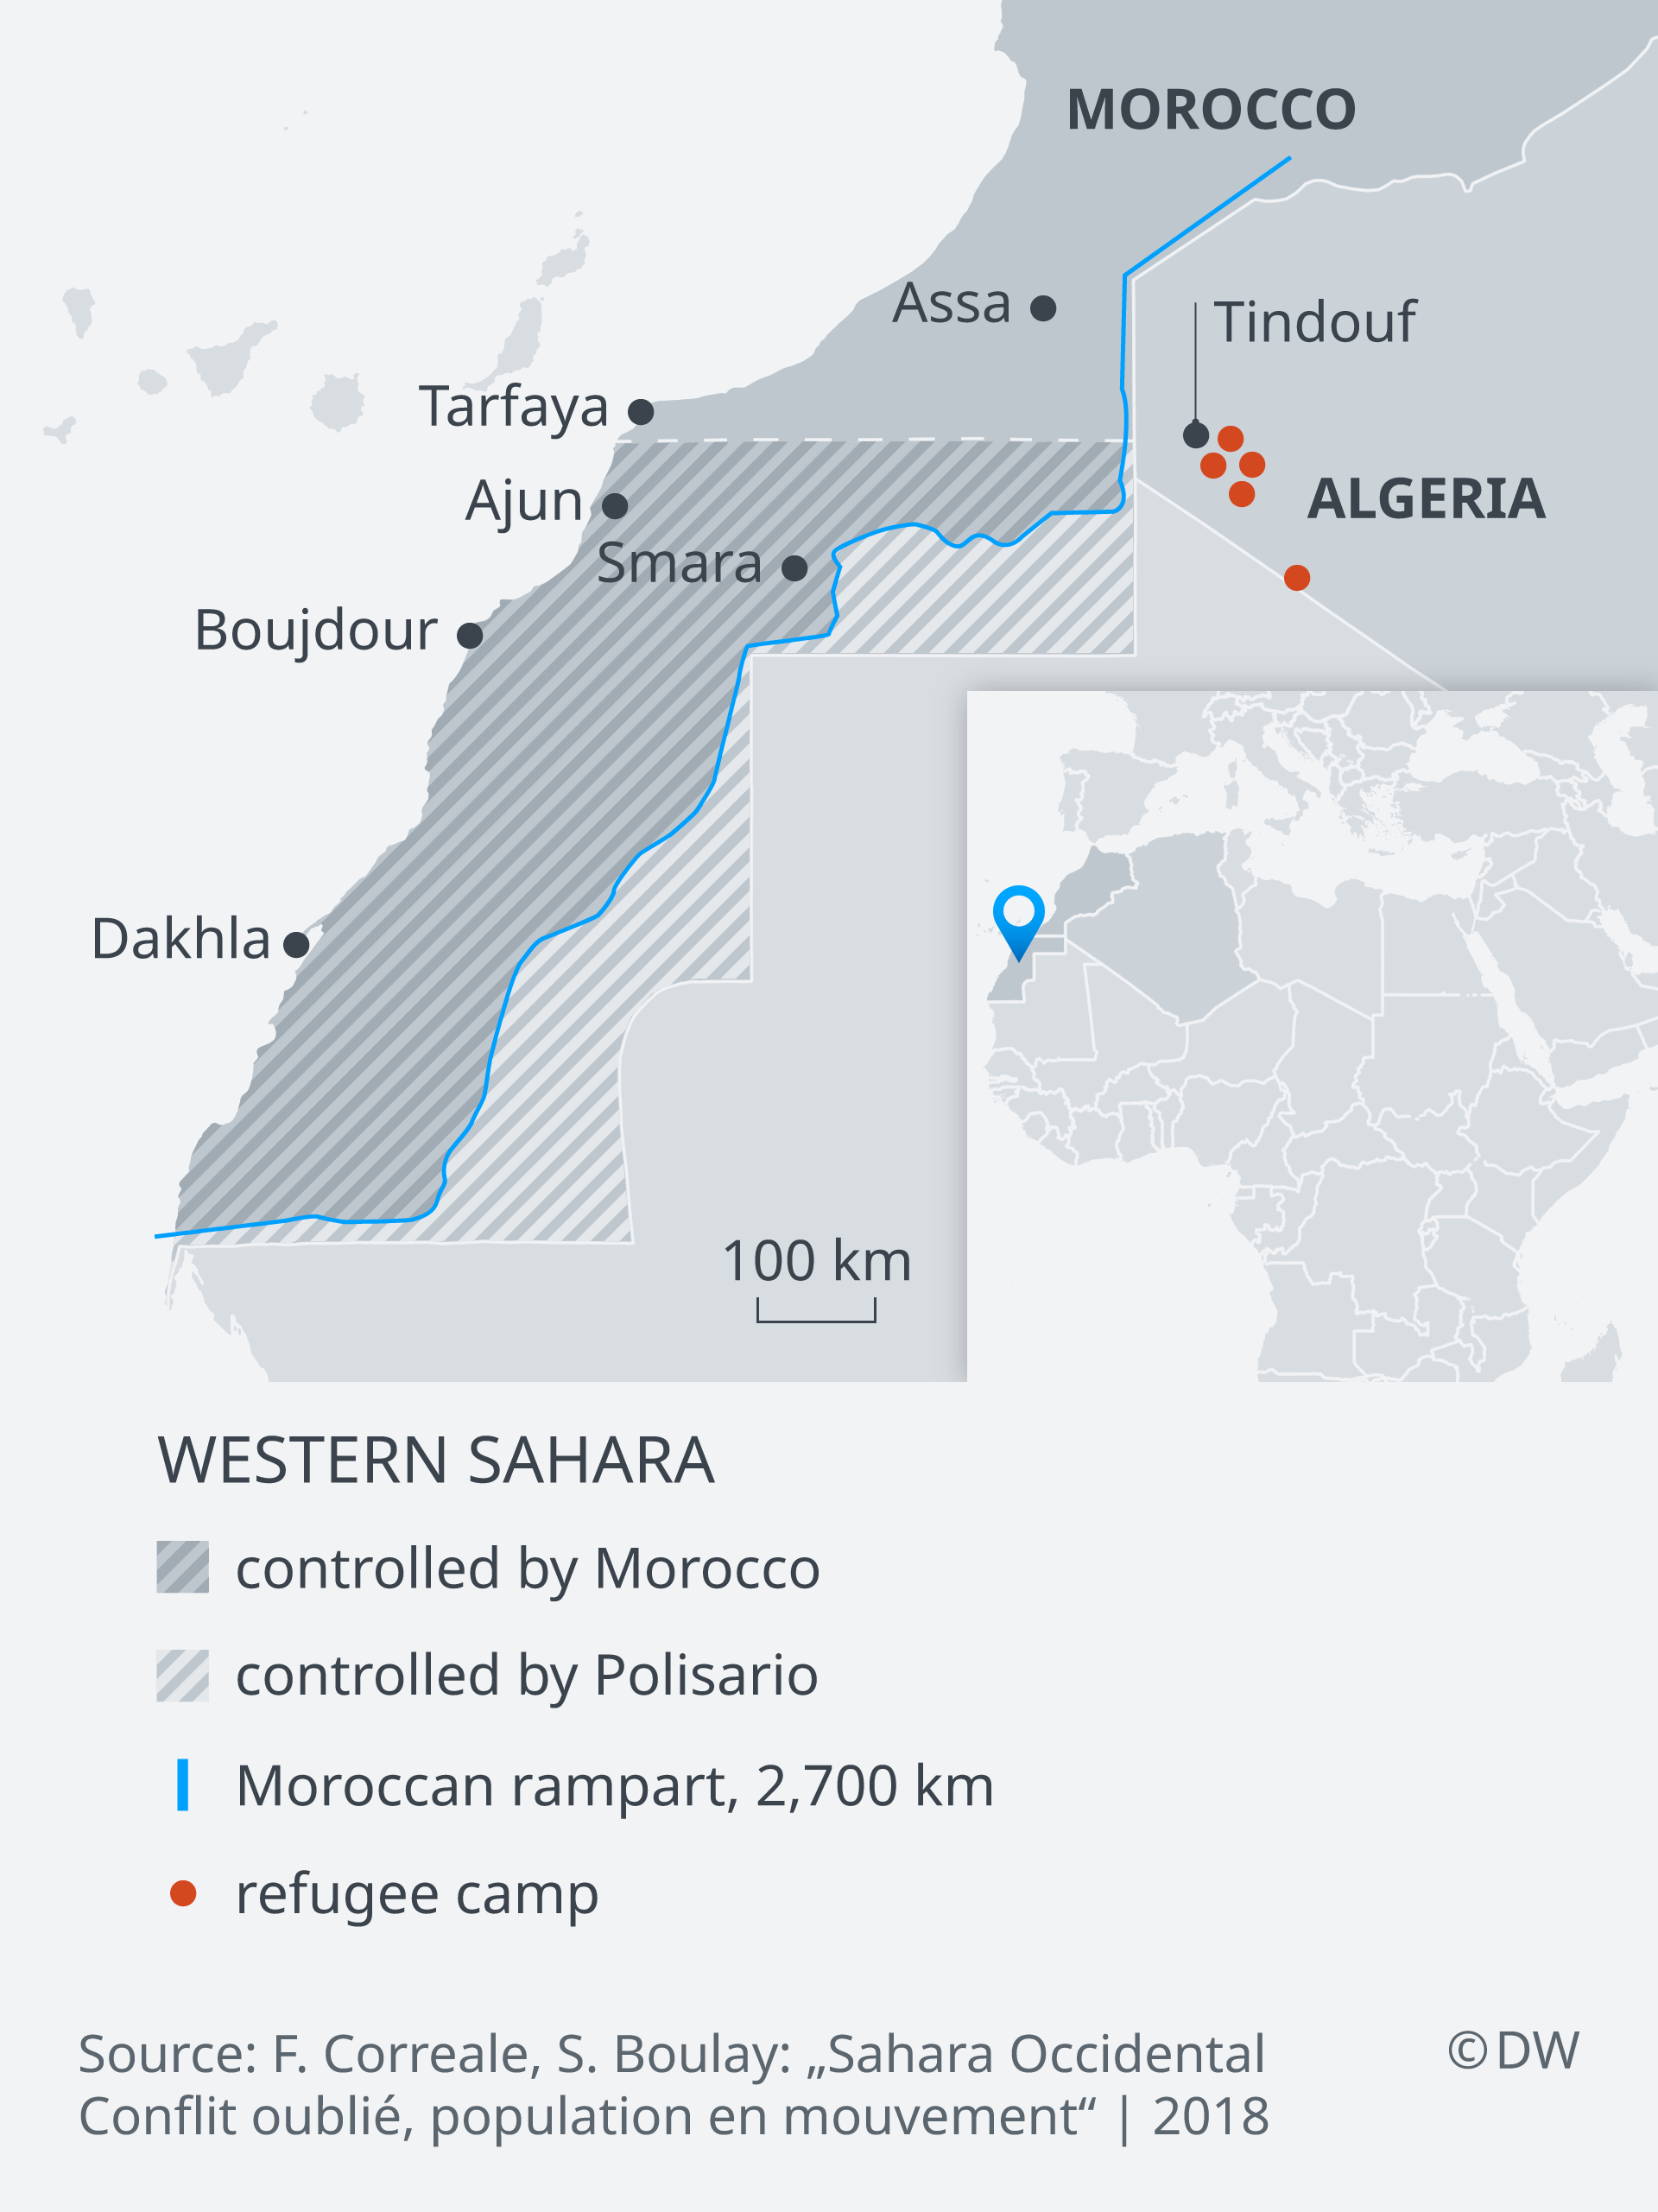 Map of Western Sahara and the neighbouring North African states (sources: DW)